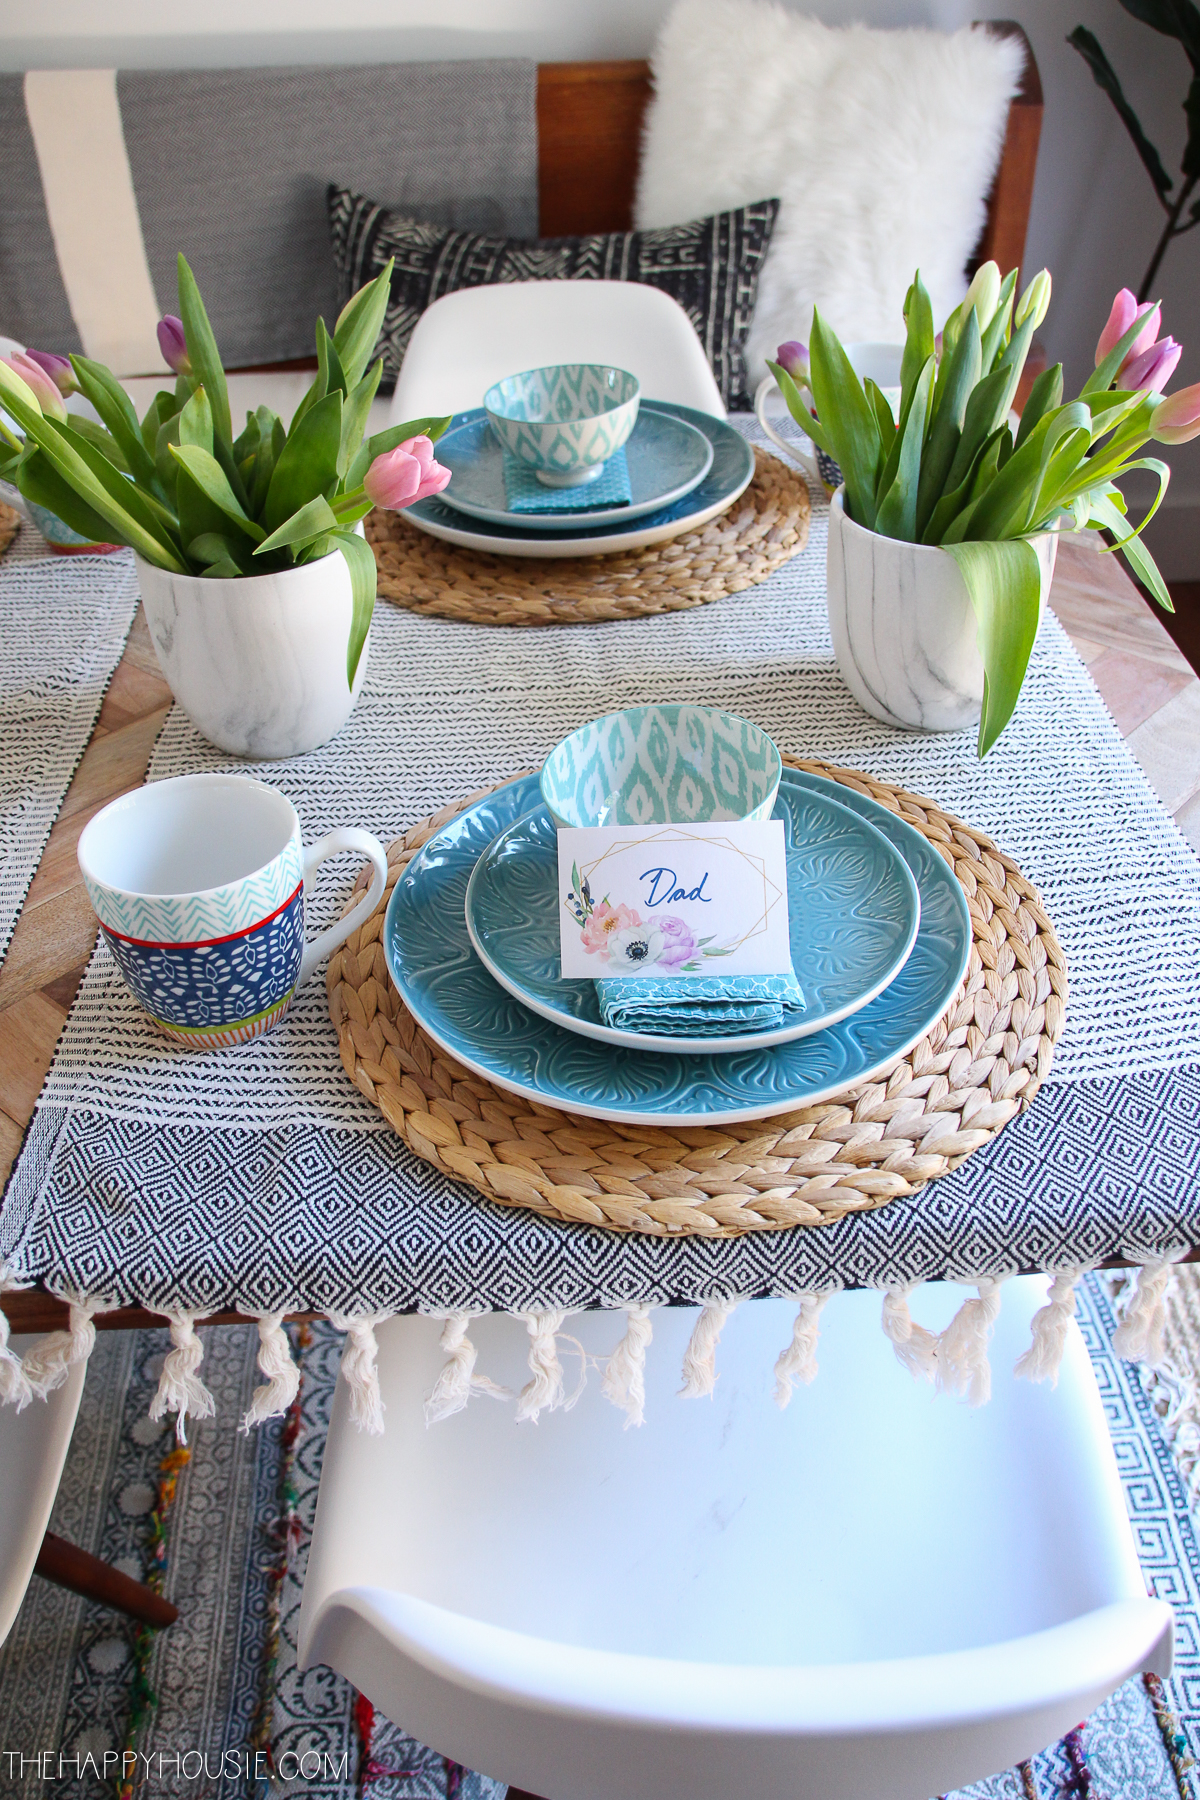 A table setting of blue plates and tulips.